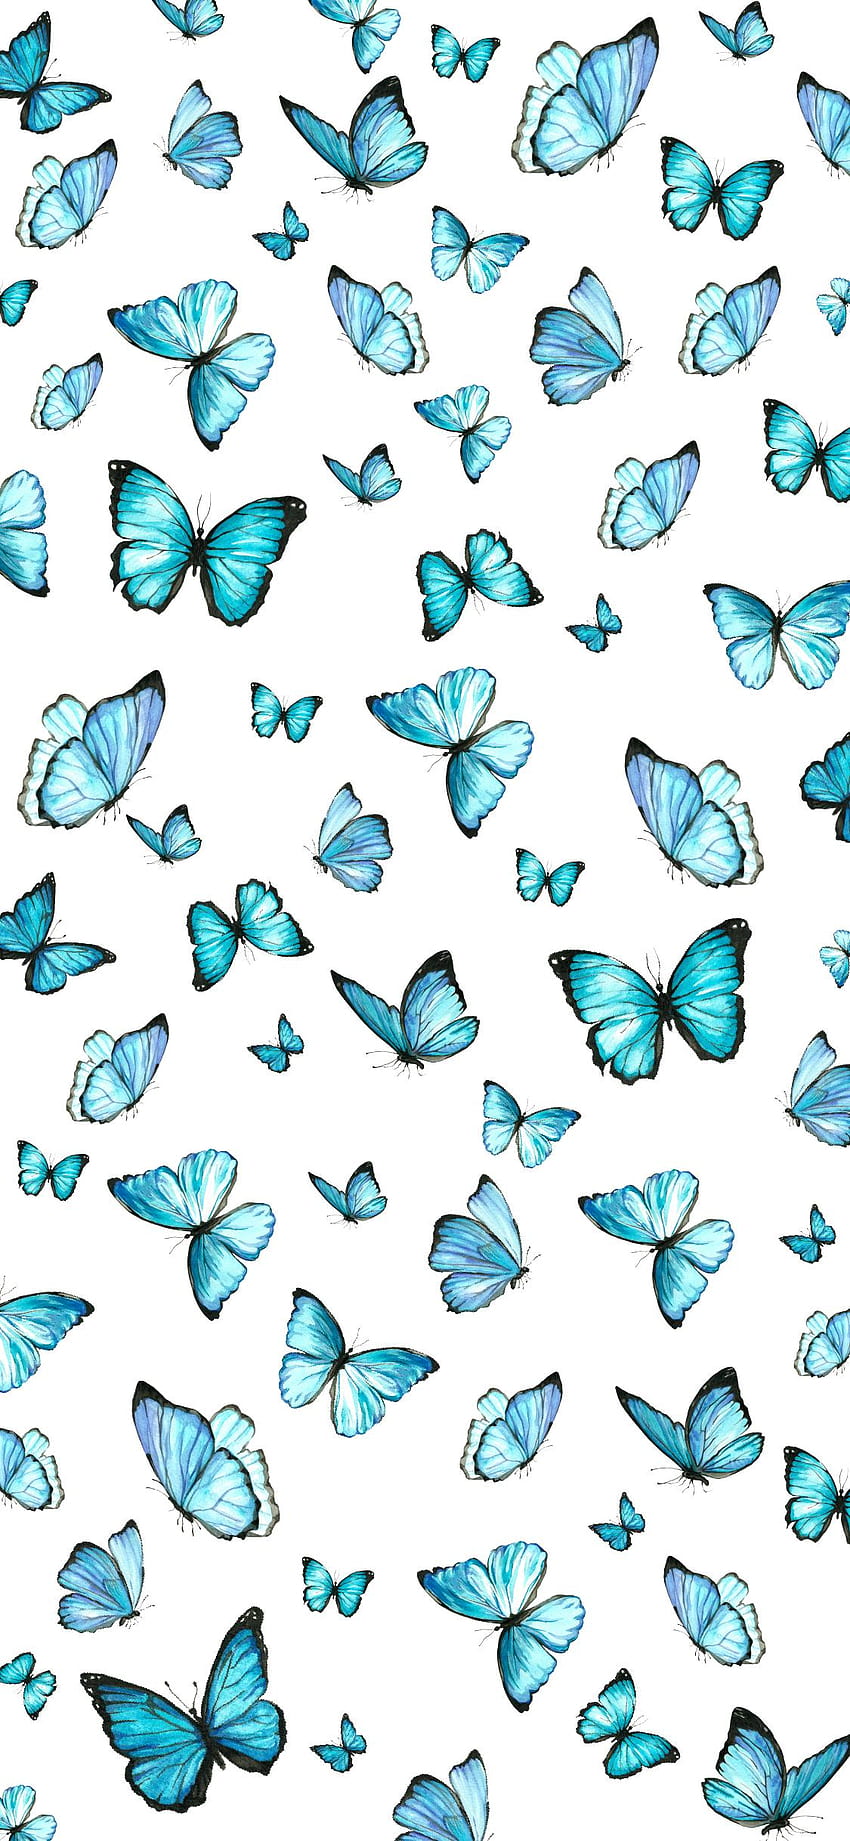 Buy Phone Wallpaper Butterfly Online in India  Etsy